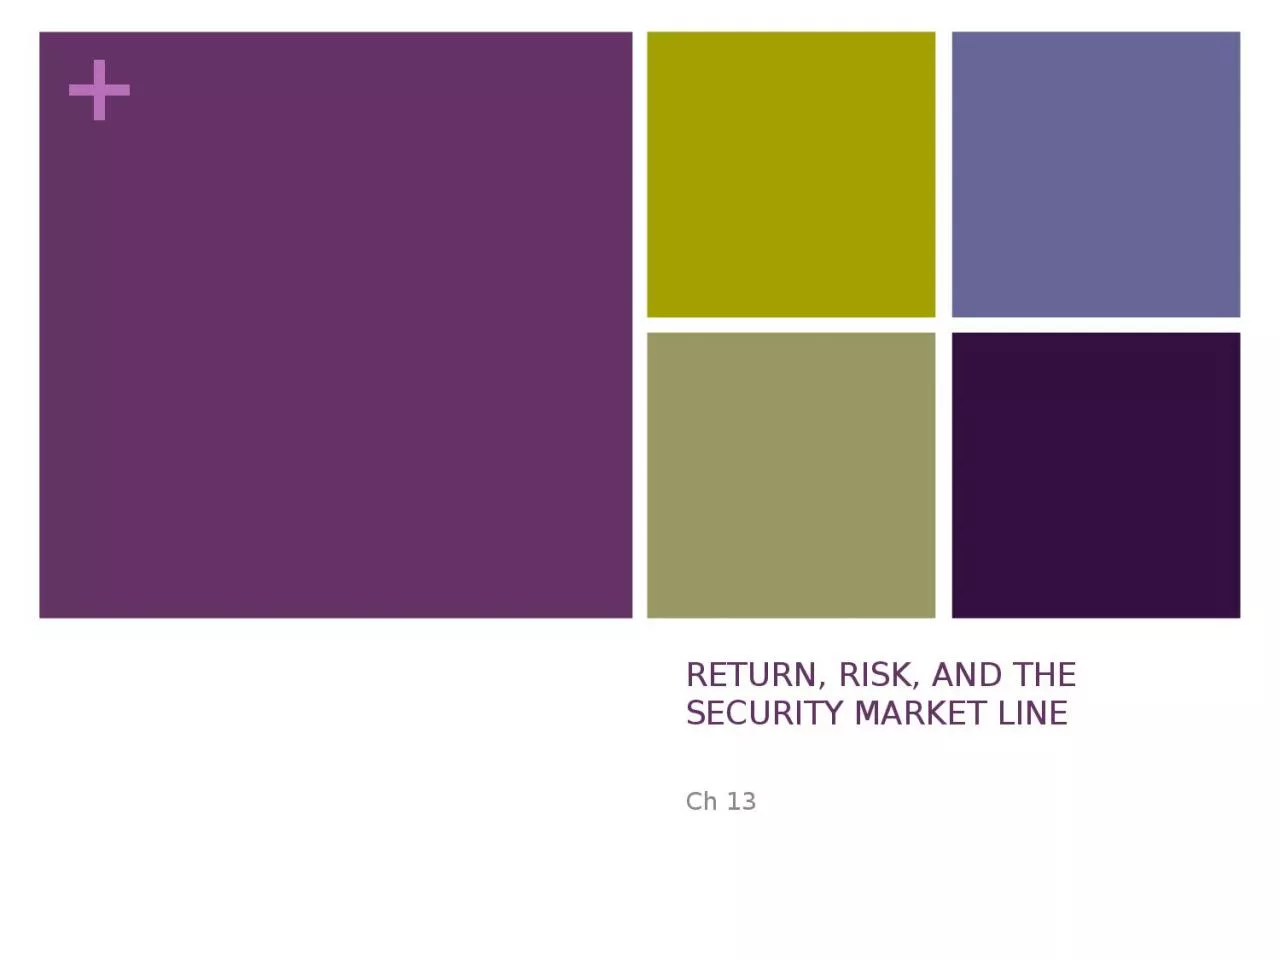 RETURN, RISK, AND THE SECURITY MARKET LINE